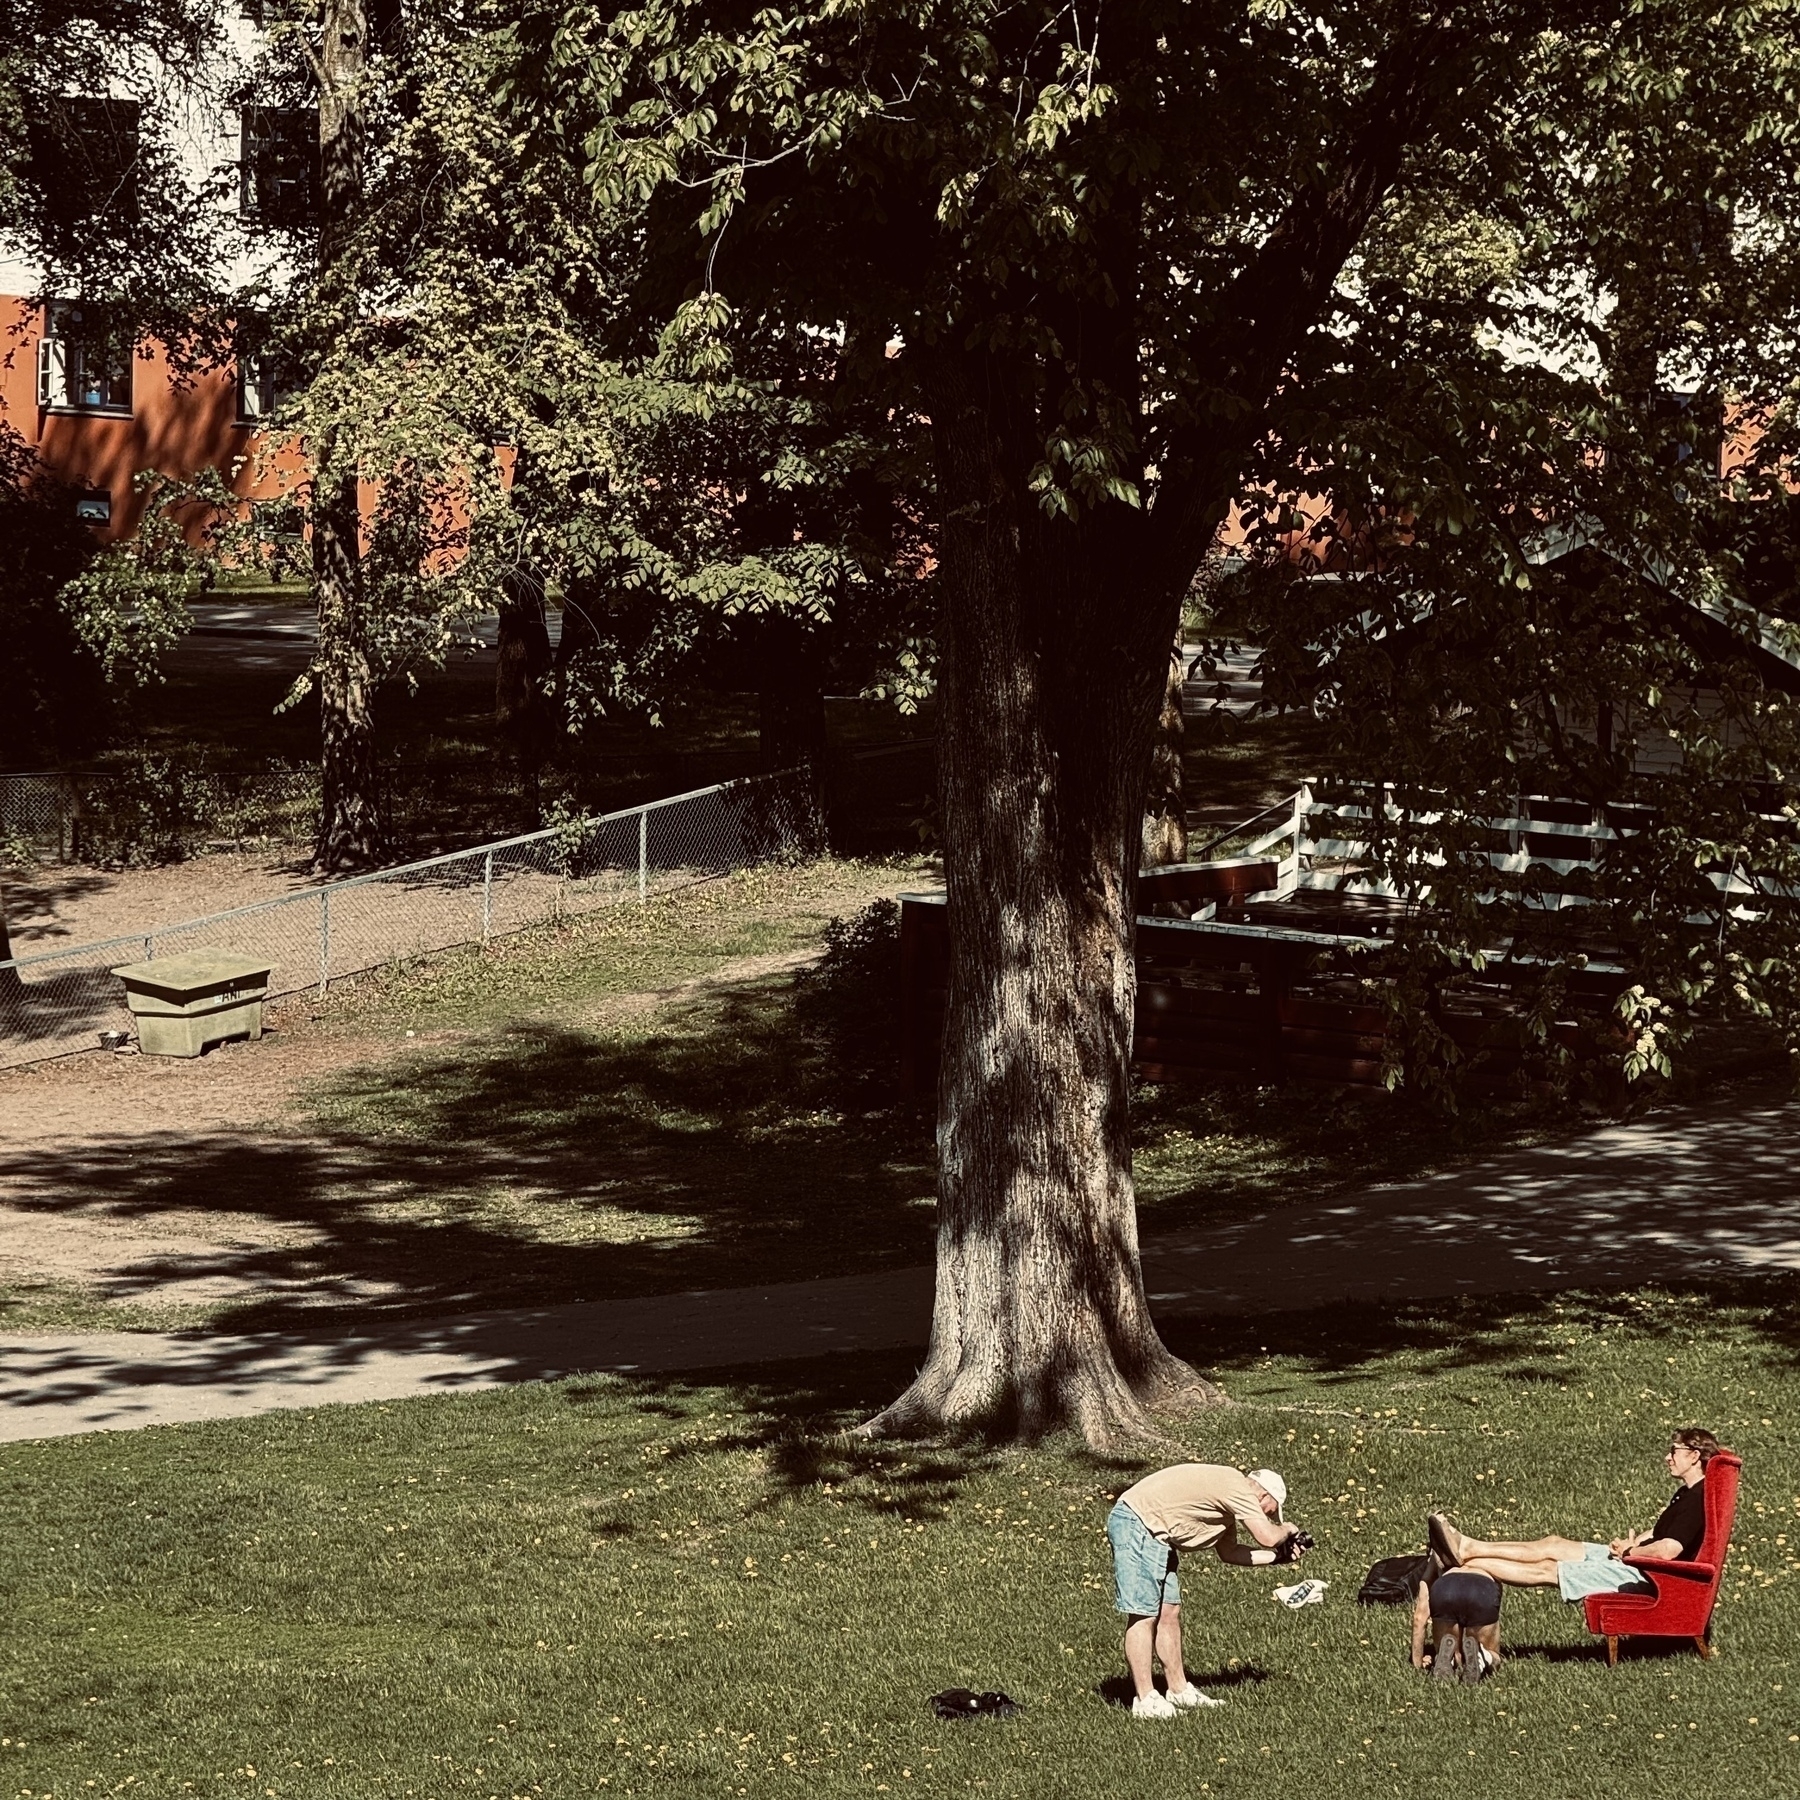 A person in a red chair relaxes under a tree while another person interacts with a small dog on a grassy lawn. (Close enough, the «dog» is a person being a foot stool for the person in the chair. The another person is a photographer). 